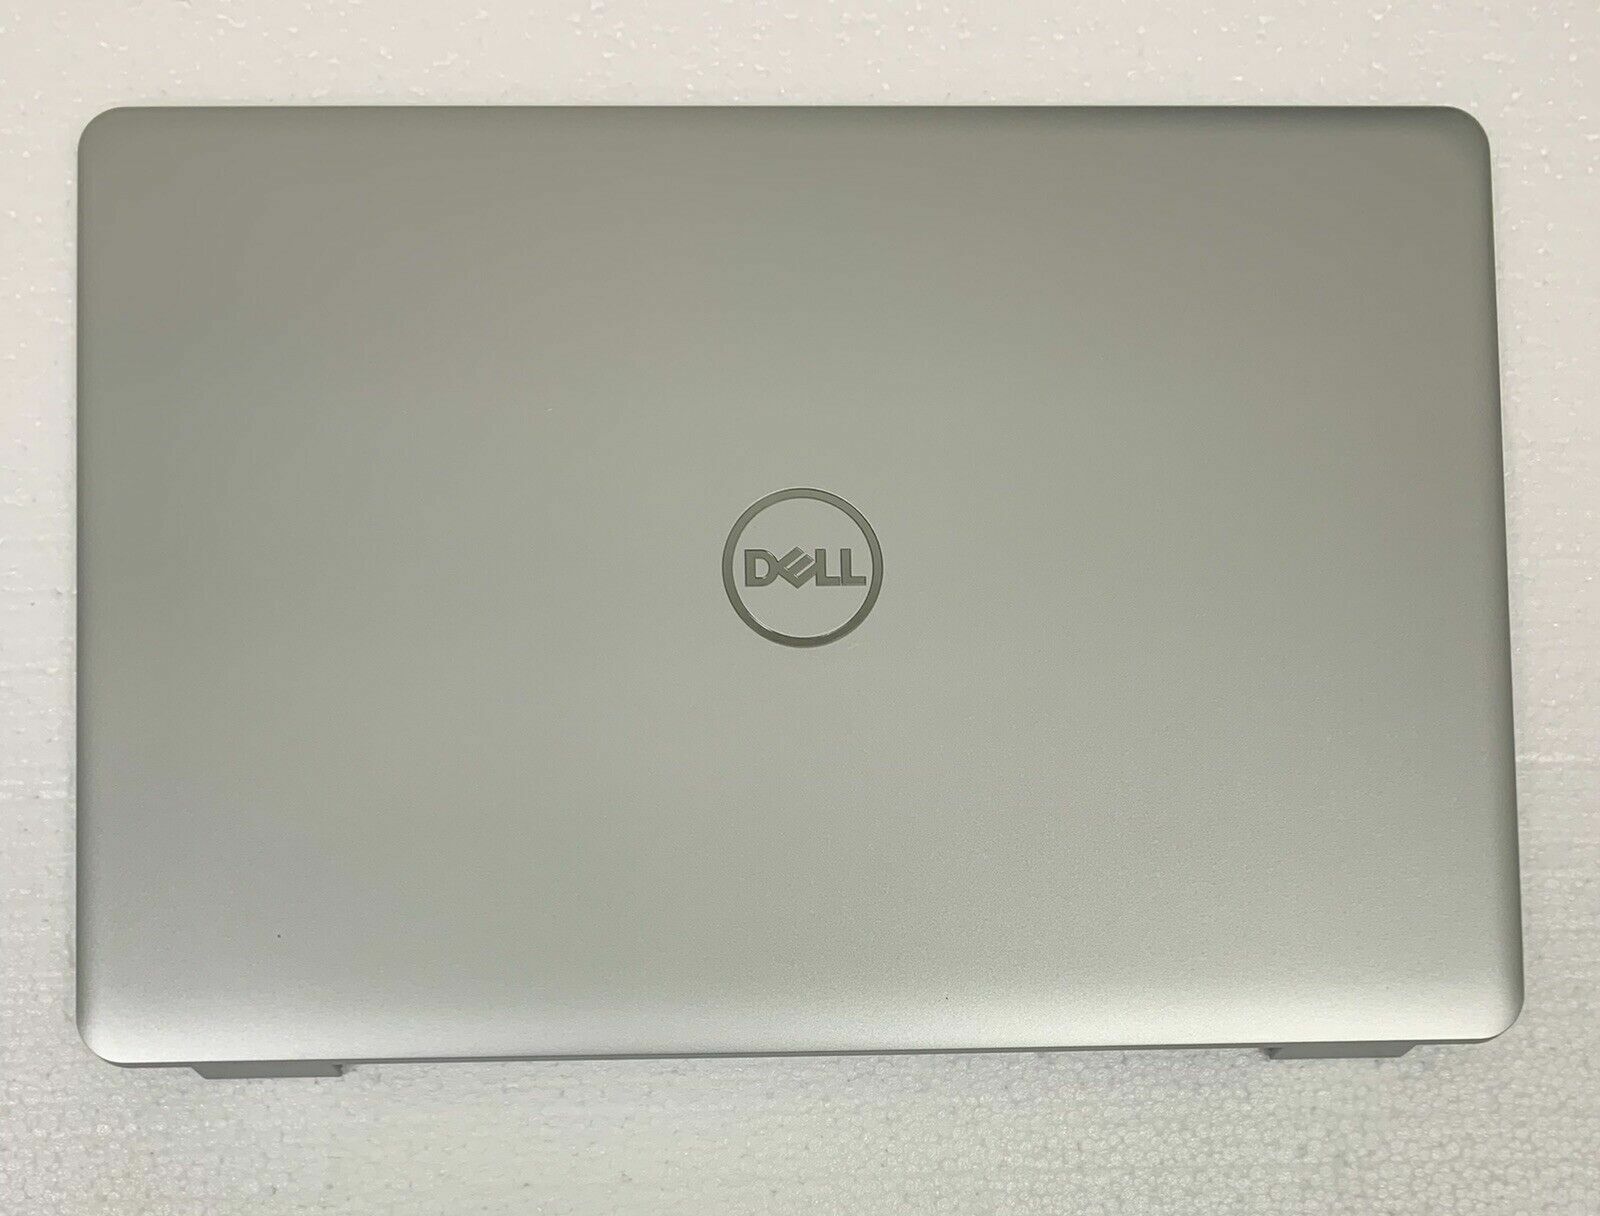 New Dell Inspiron 15 5584 LCD Rear Top Lid Silver Back Cover 0GYCJR GYCJR US